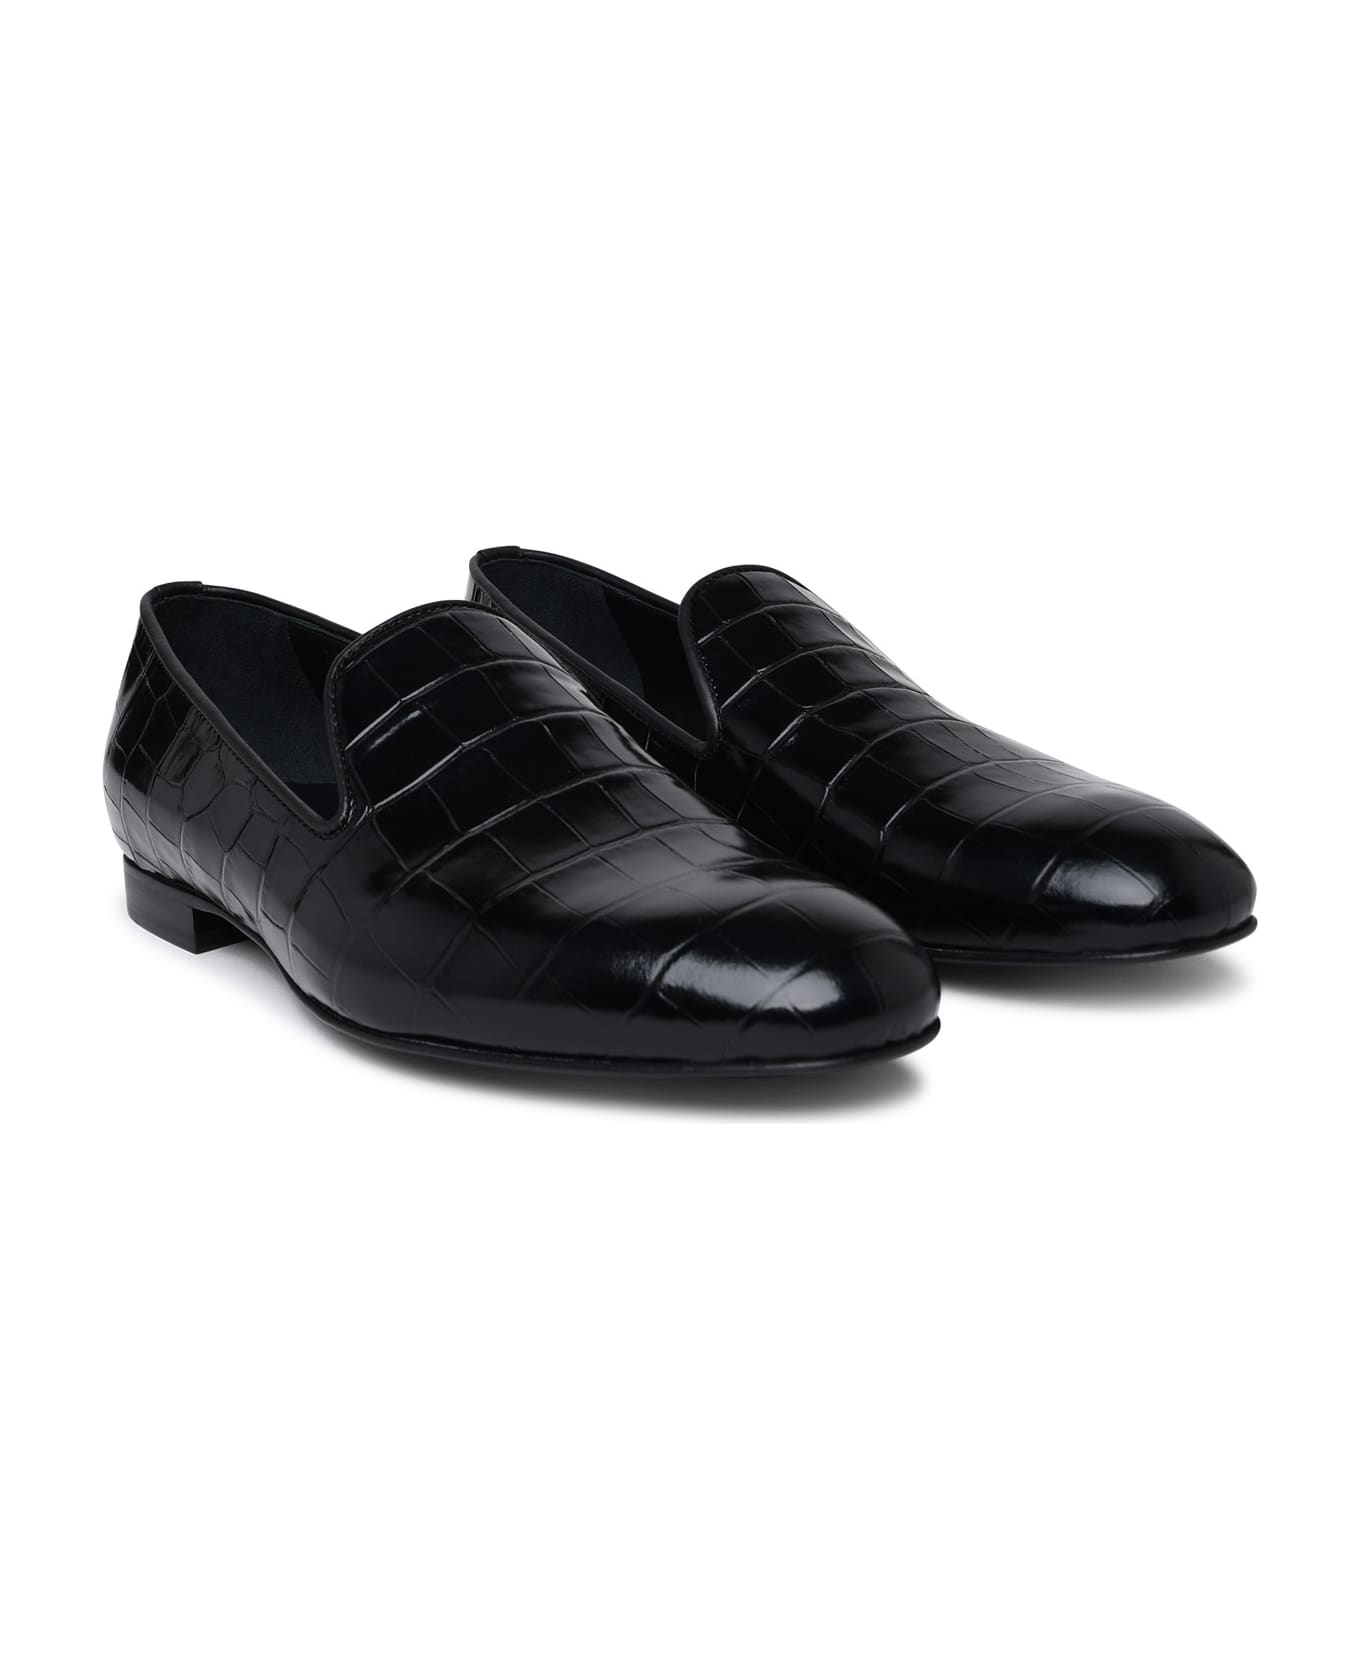 Versace Black Calf Leather Loafers - BLACK ローファー＆デッキシューズ